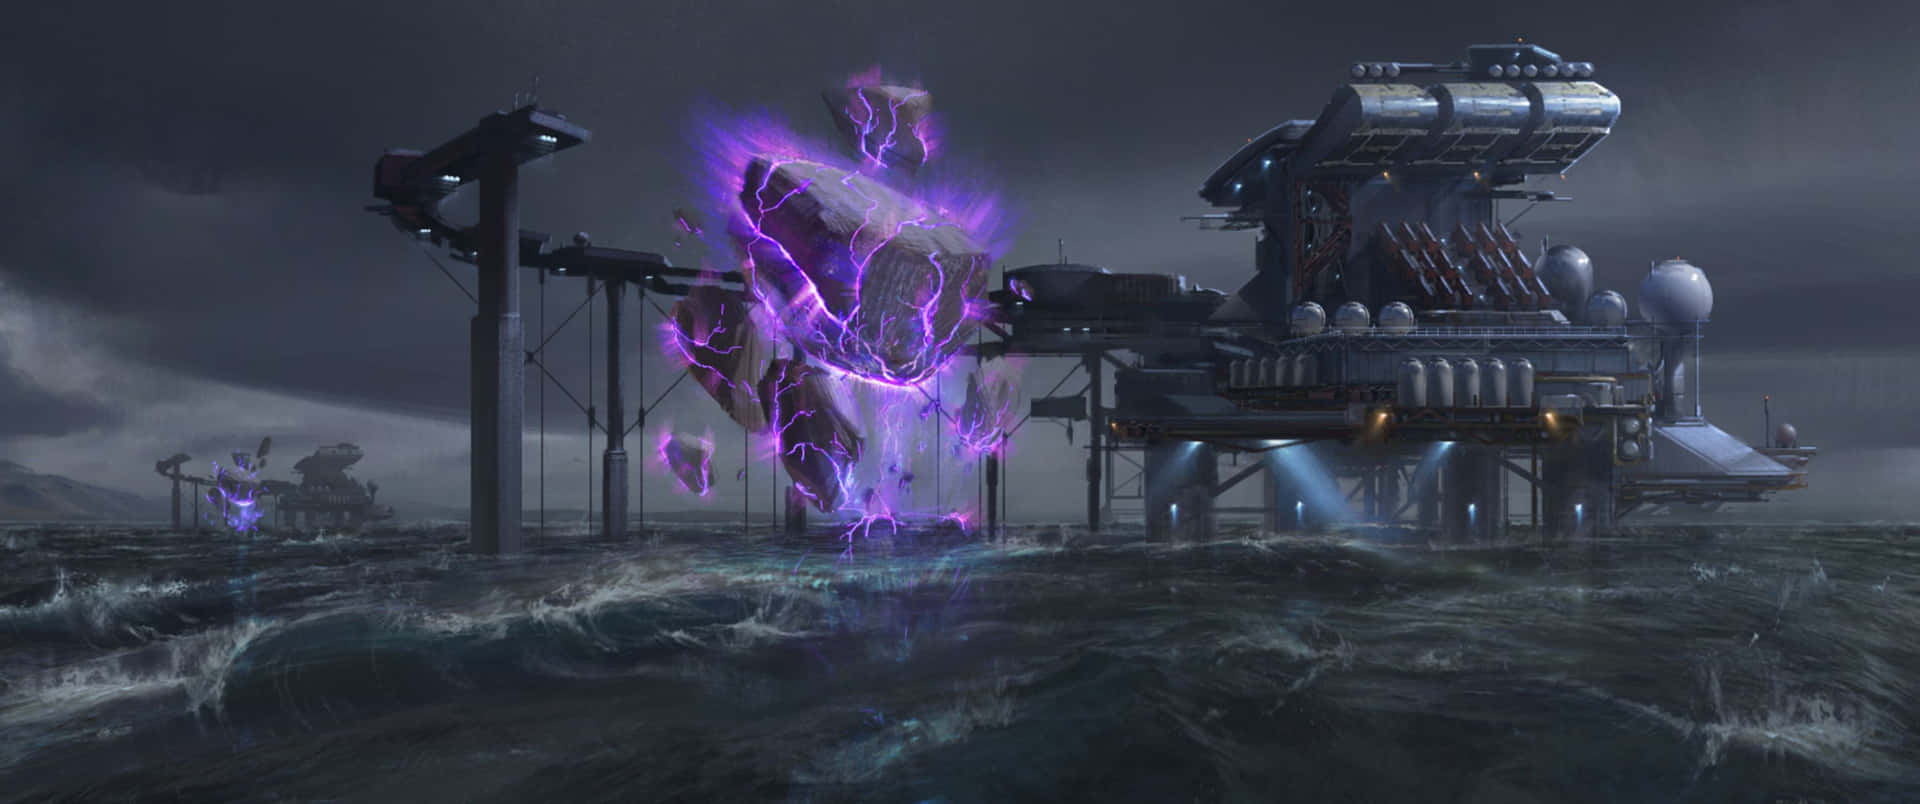 A Purple Ship In The Middle Of A Storm